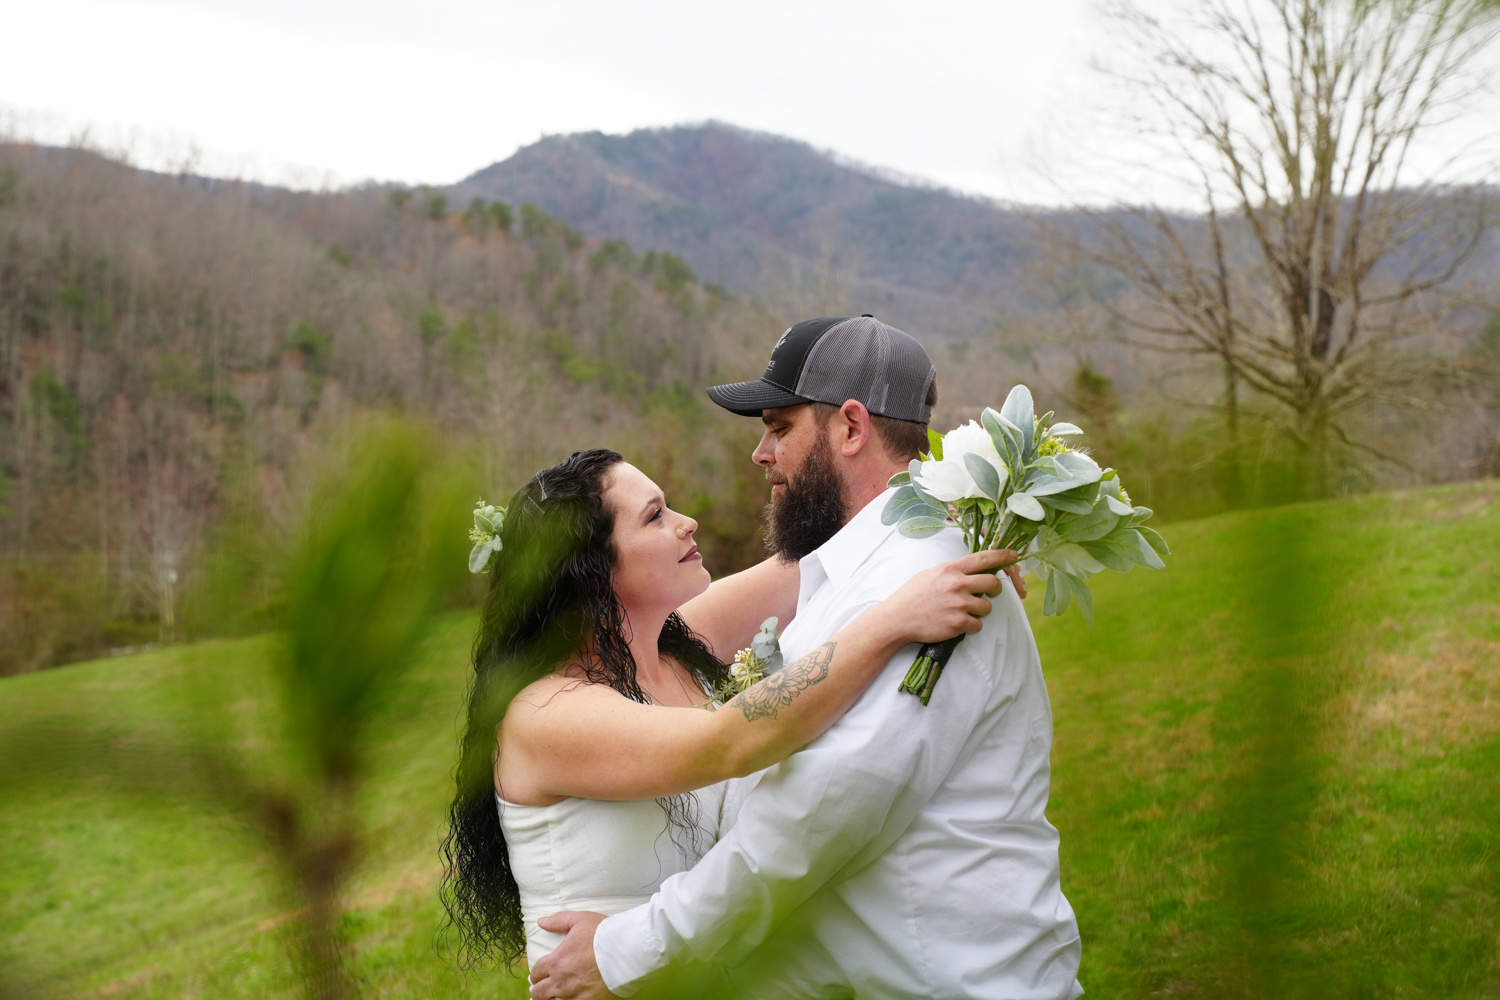 Groom in a baseball cap holding his bride behind evergreen branches in the mountains